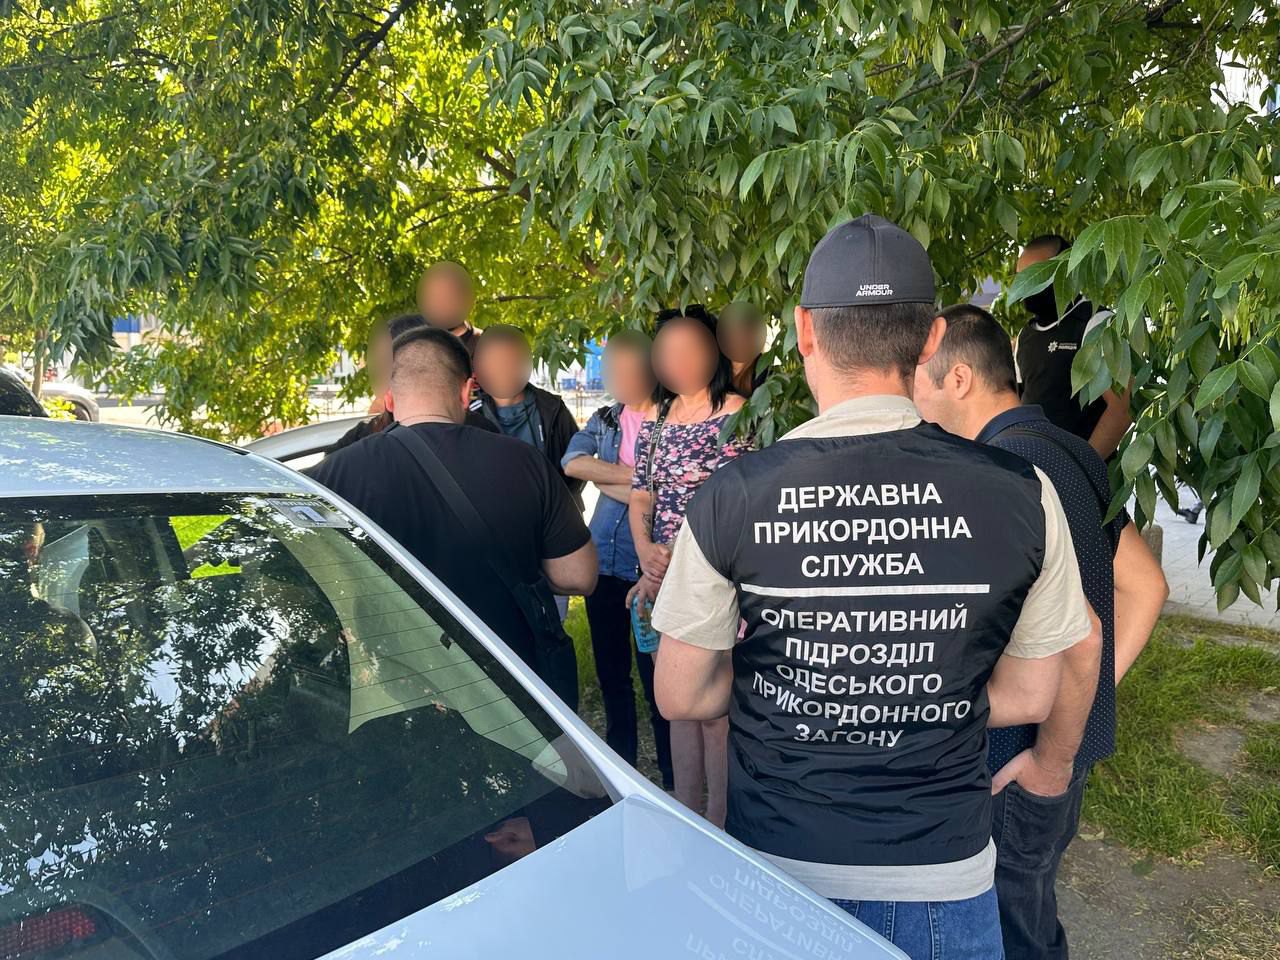 Fake marriage scheme exposed in Kyiv